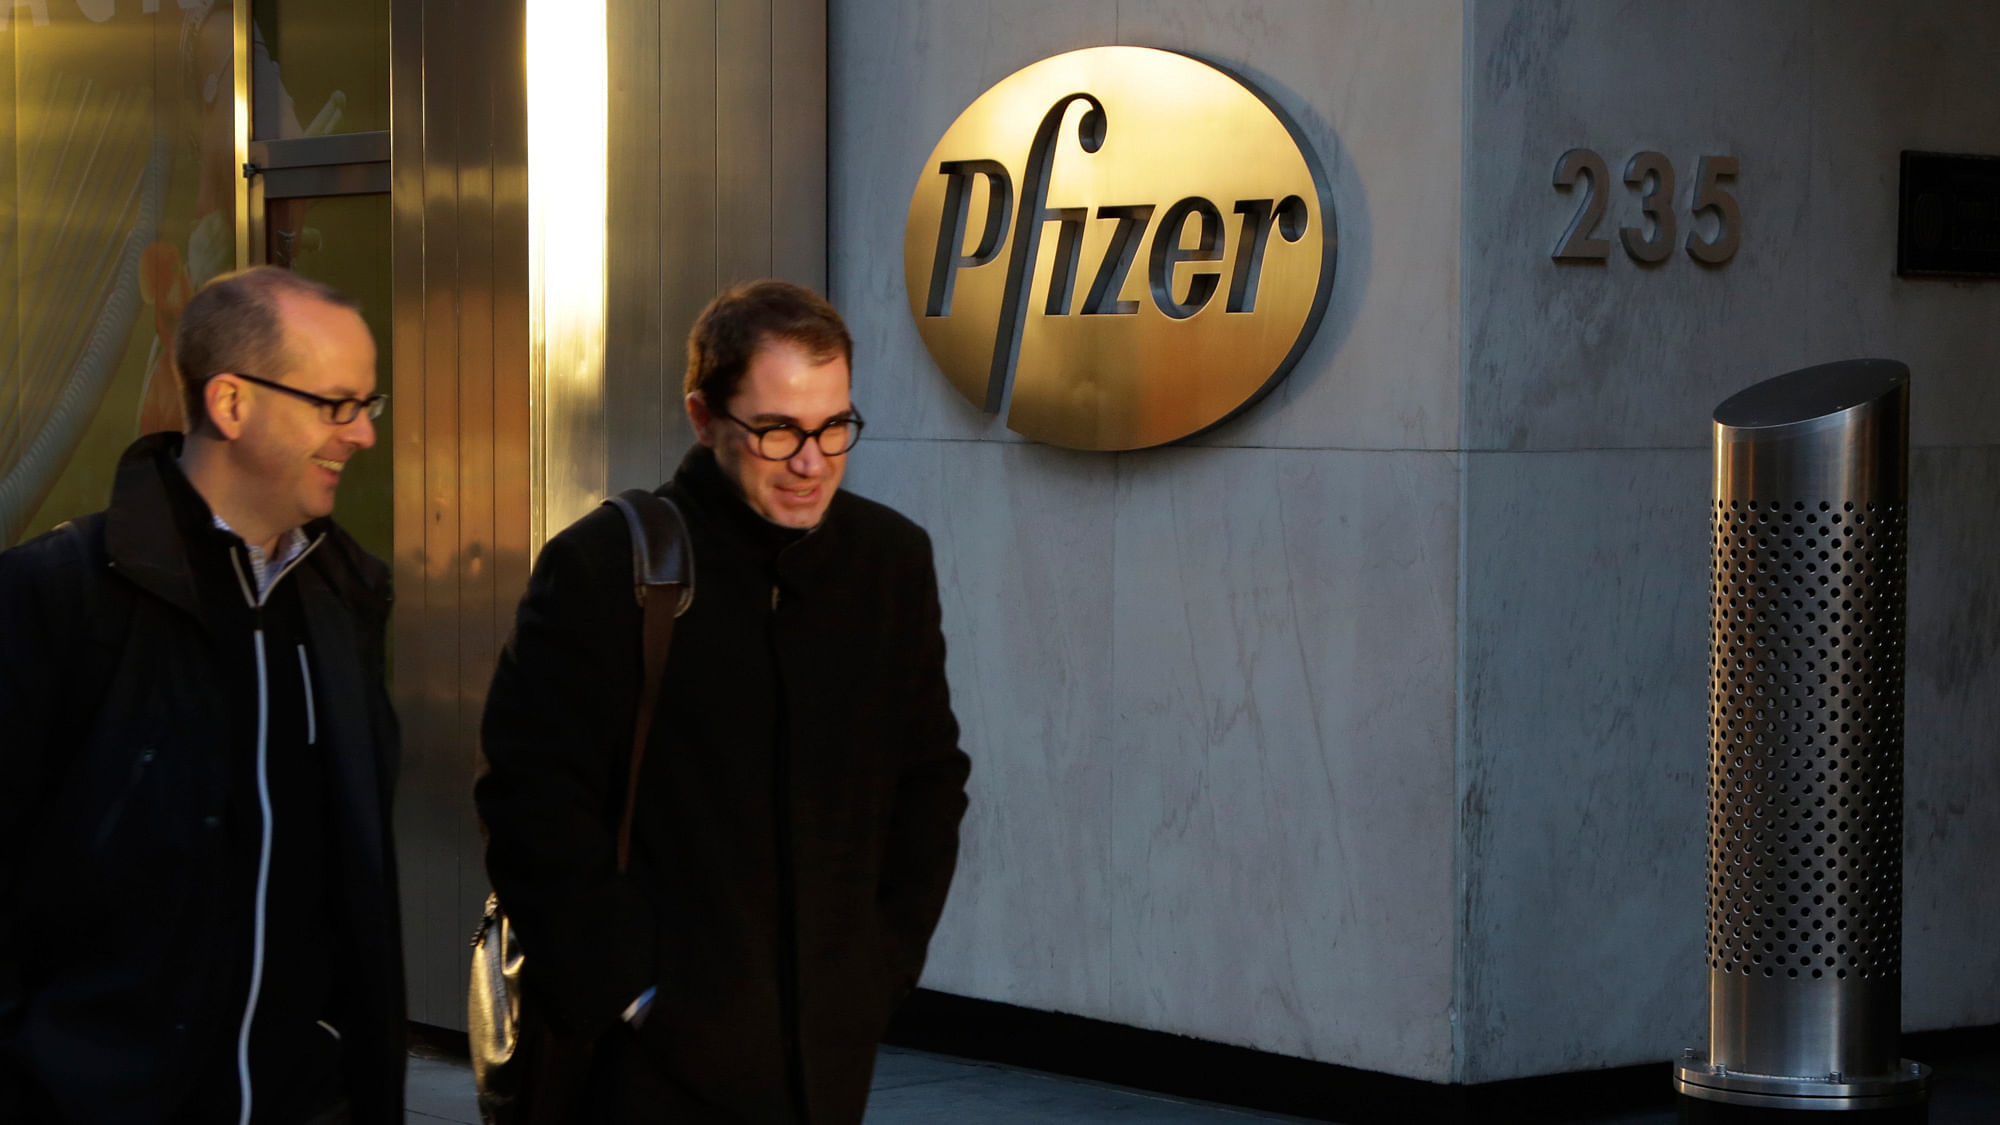 Medivation shares jumped nearly 20 percent to close at $80.42, just shy of the offer price of $81.50 per share. Shares of Pfizer, the largest US drugmaker, were down 0.4 percent at $34.84.&nbsp;(Photo: AP)